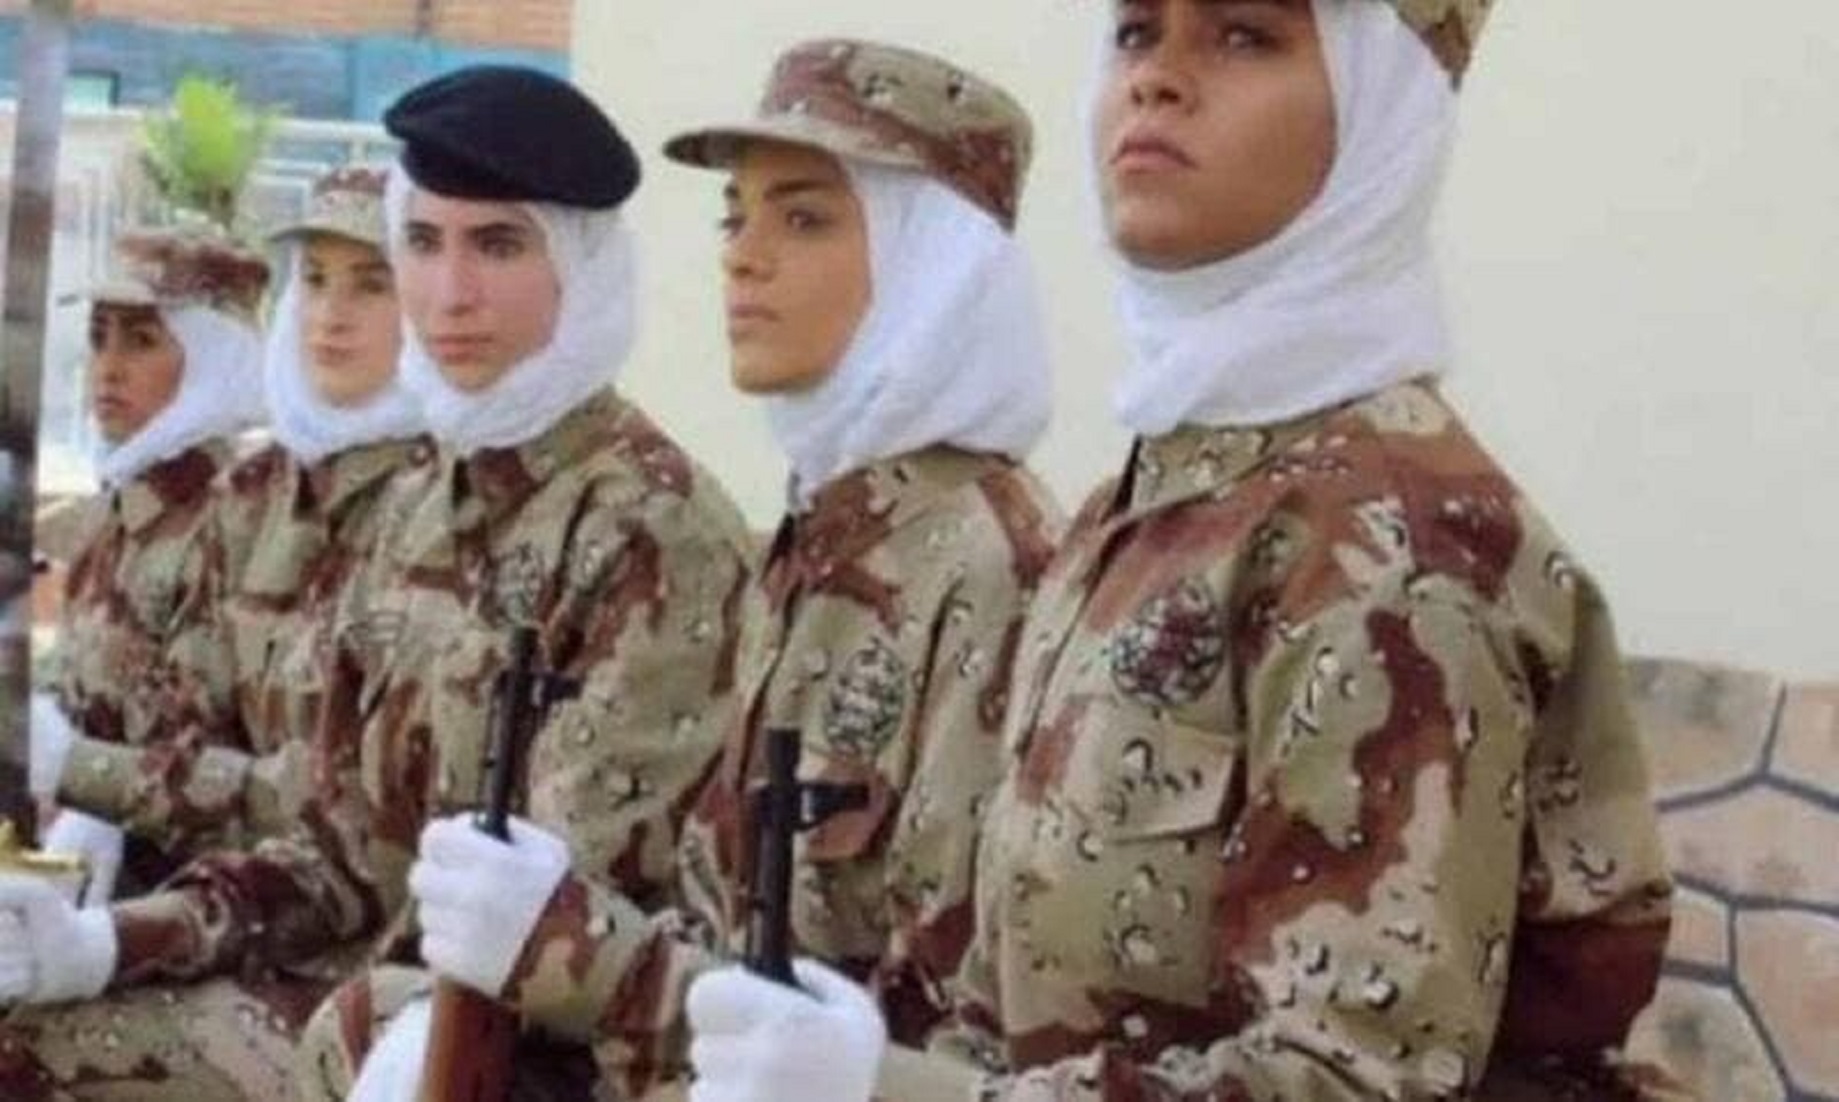 Kuwaiti Women To Enlist In The Army In ‘Combat Roles’